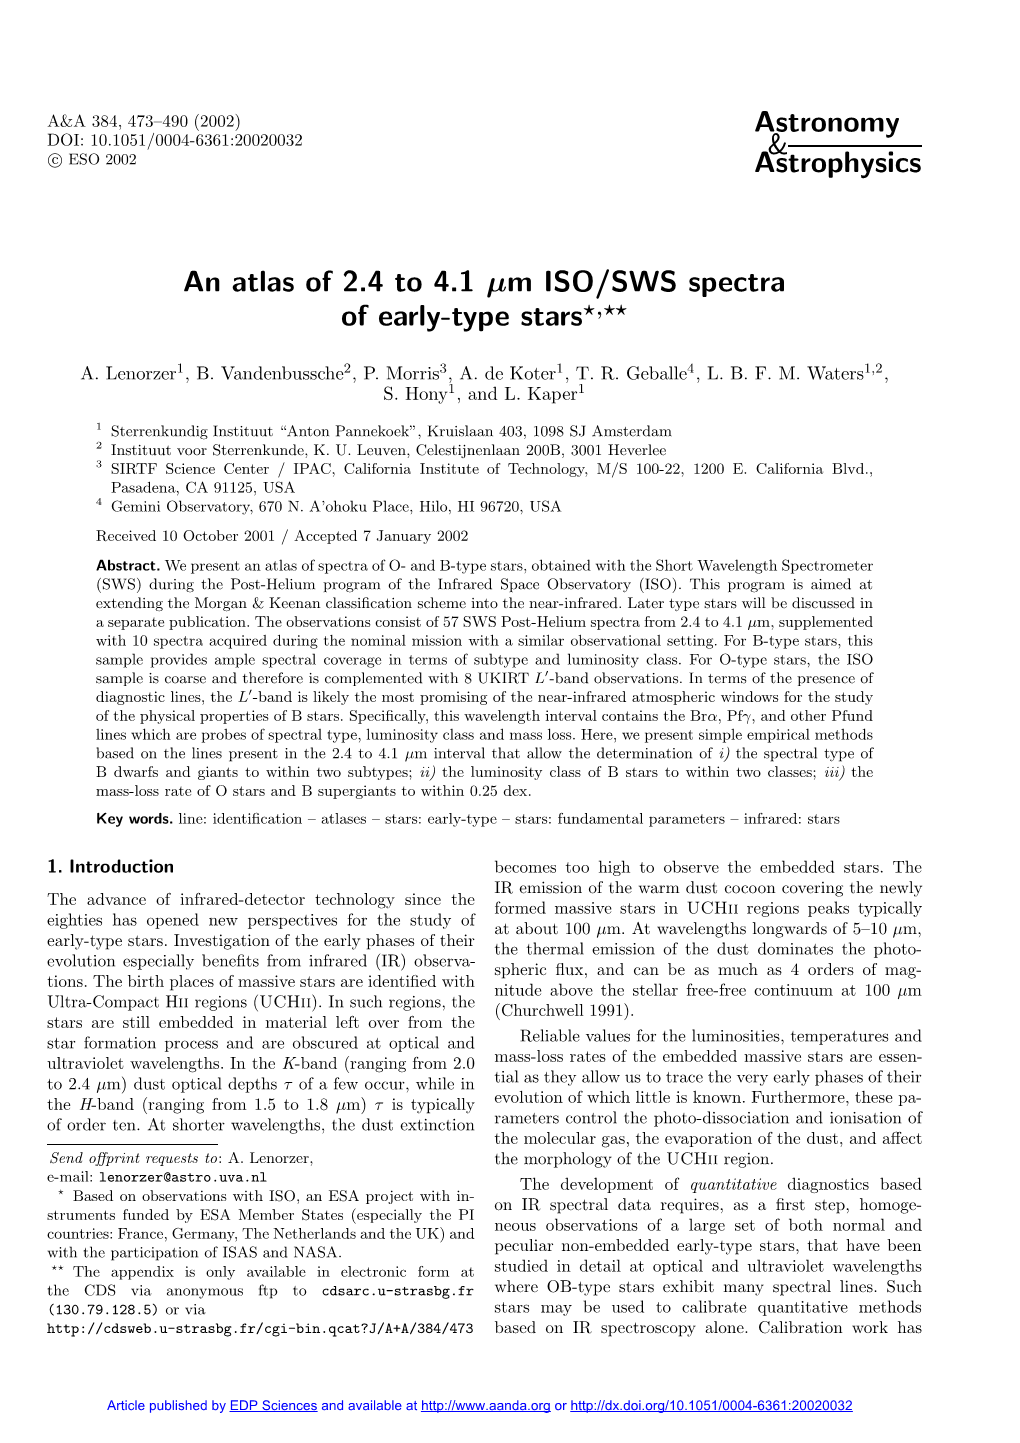 An Atlas of 2.4 to 4.1 Μm ISO/SWS Spectra of Early-Type Stars